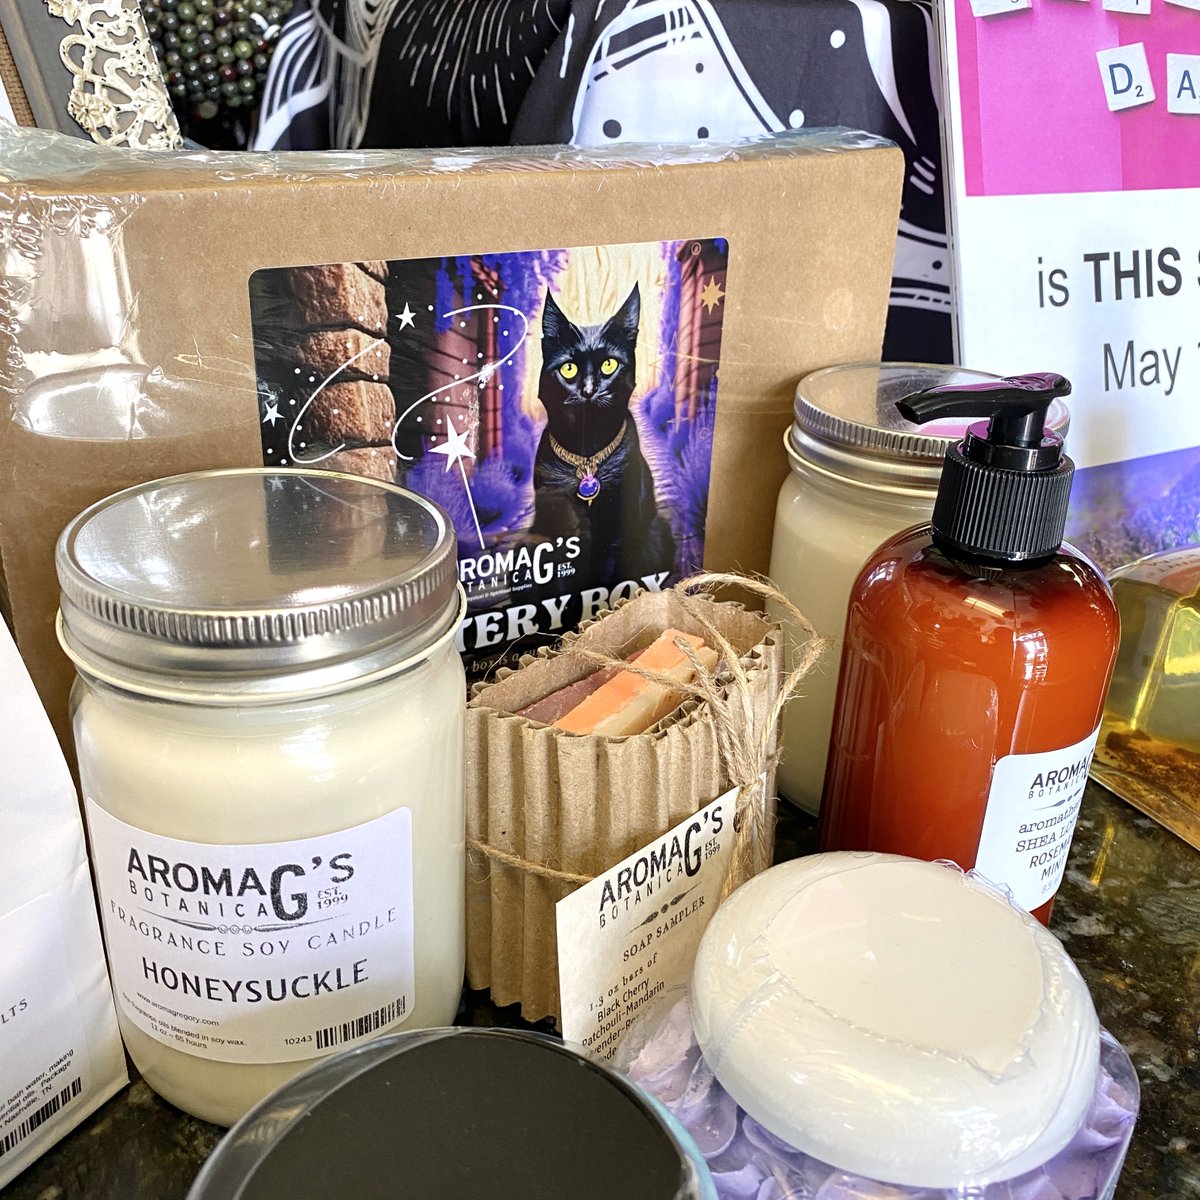 Discover a wide selection of gifts perfect for Mother's Day! Find them all at aromaG's Botanica.

#MothersDay #Mothers #MothersDayGifts #Gifts #Candles #BathAndBody #MysteryBox